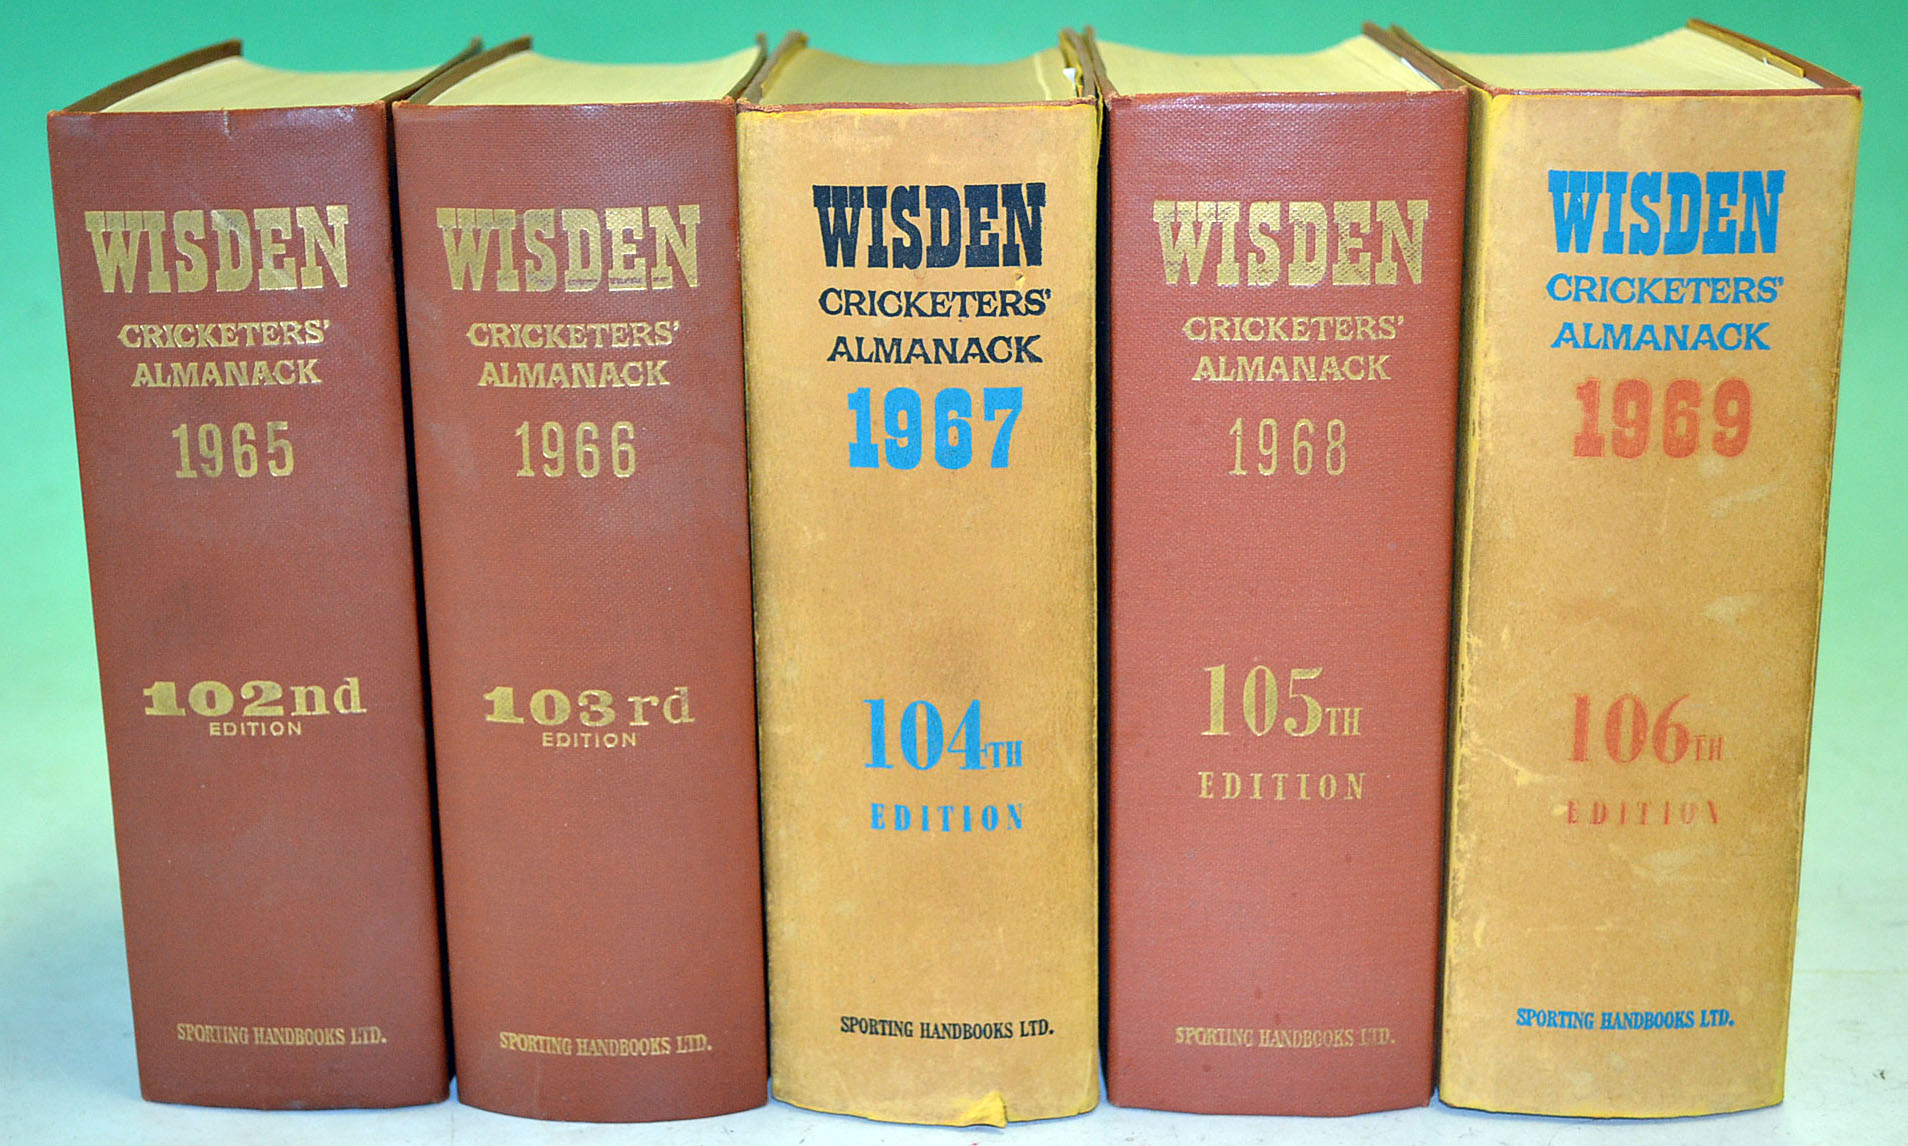 1965-1969 Wisden Cricketers’ Almanacks – all with original HB covers and 2 x dust covers, all